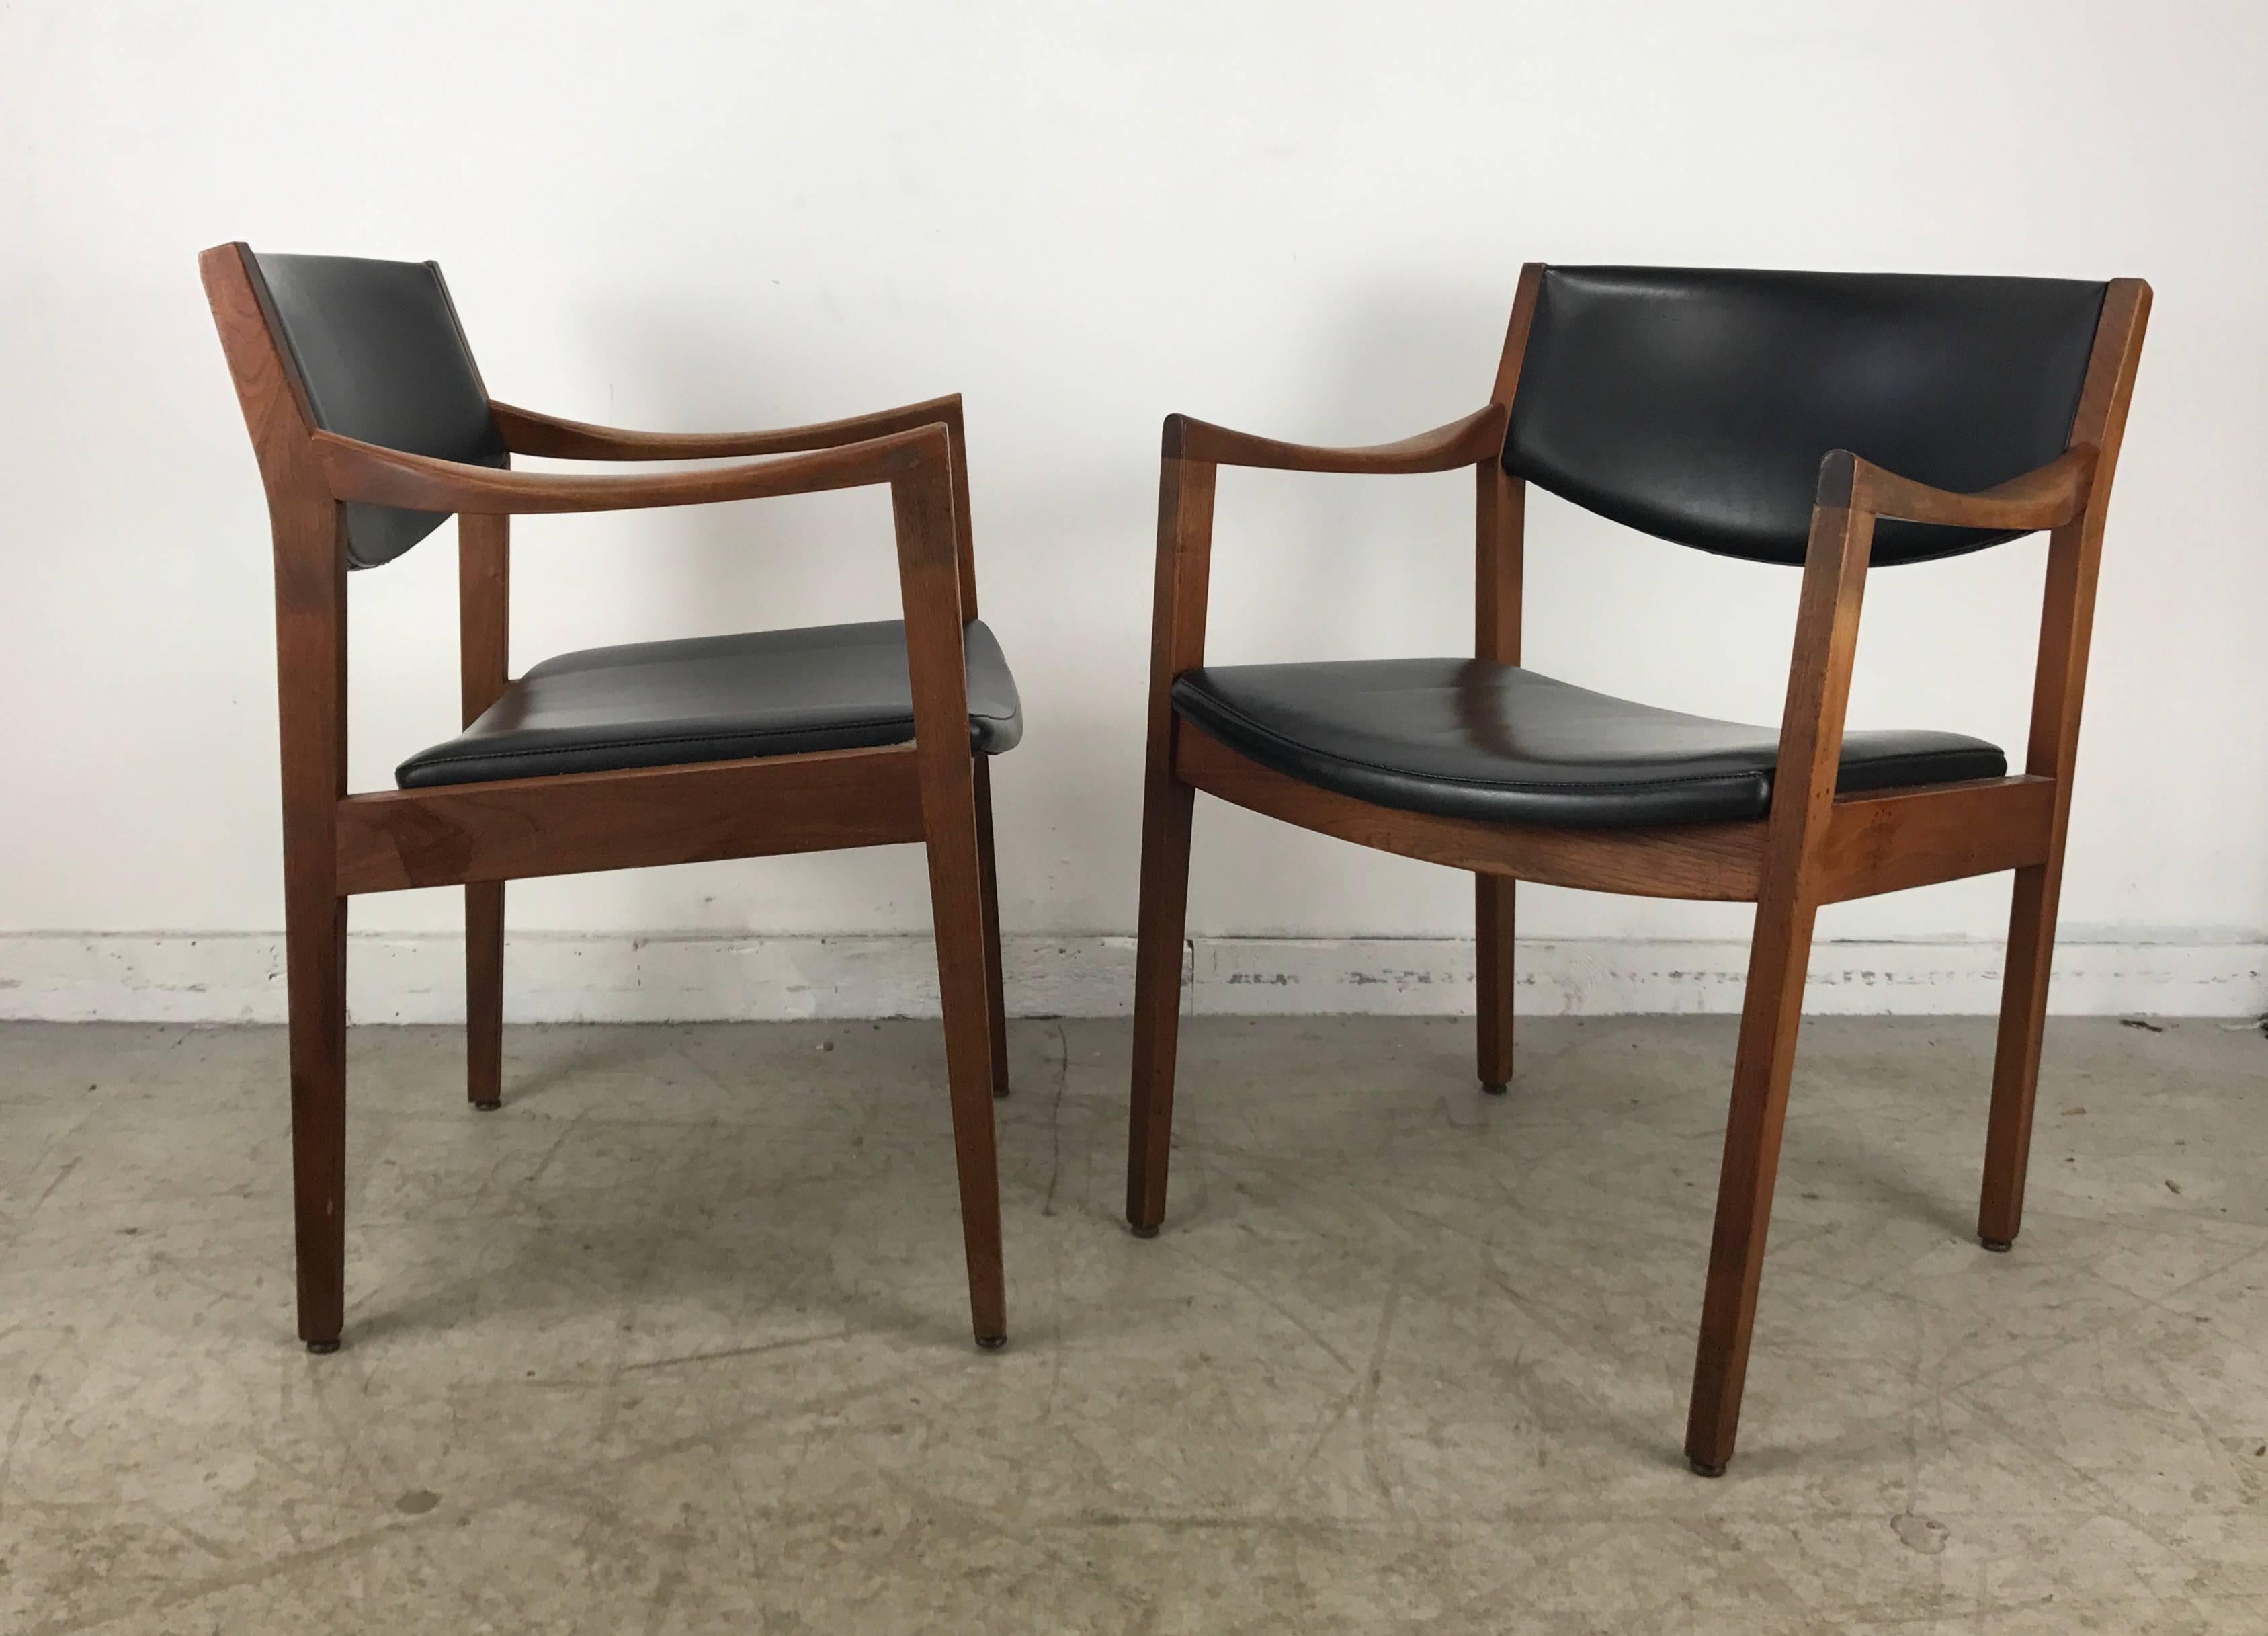 Stunning pair of modernist oiled walnut and Naugahyde armchairs manufactured by Gunlocke, extremely comfortable, solid, sturdy in the Manner of Jens Risom.